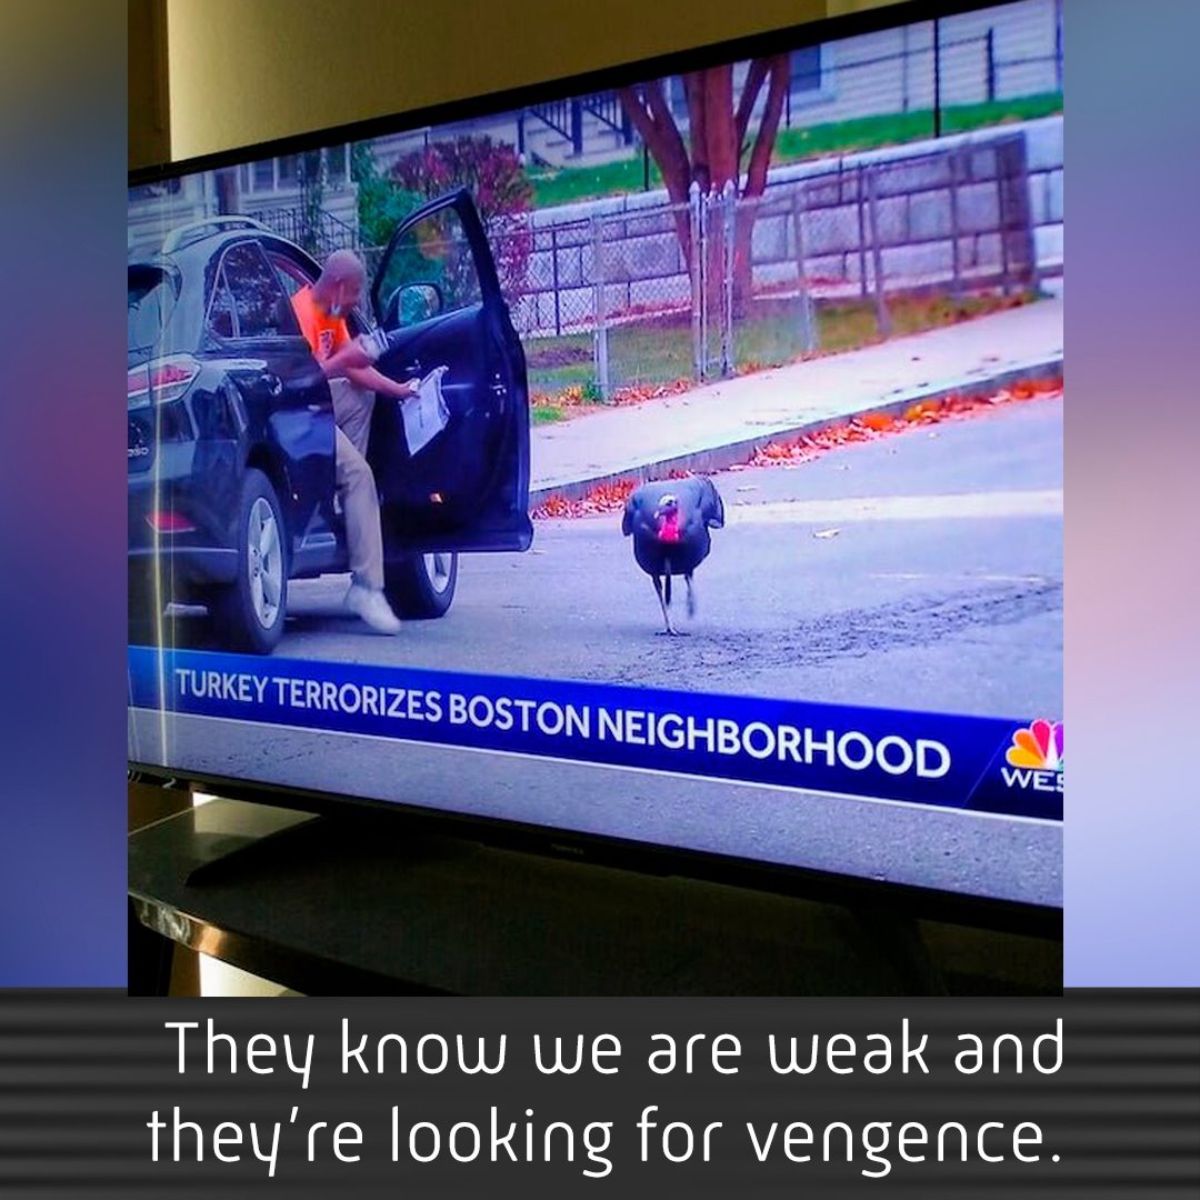 display advertising - 14 Turkey Terrorizes Boston Neighborhood Wes They know we are weak and they're looking for vengence.